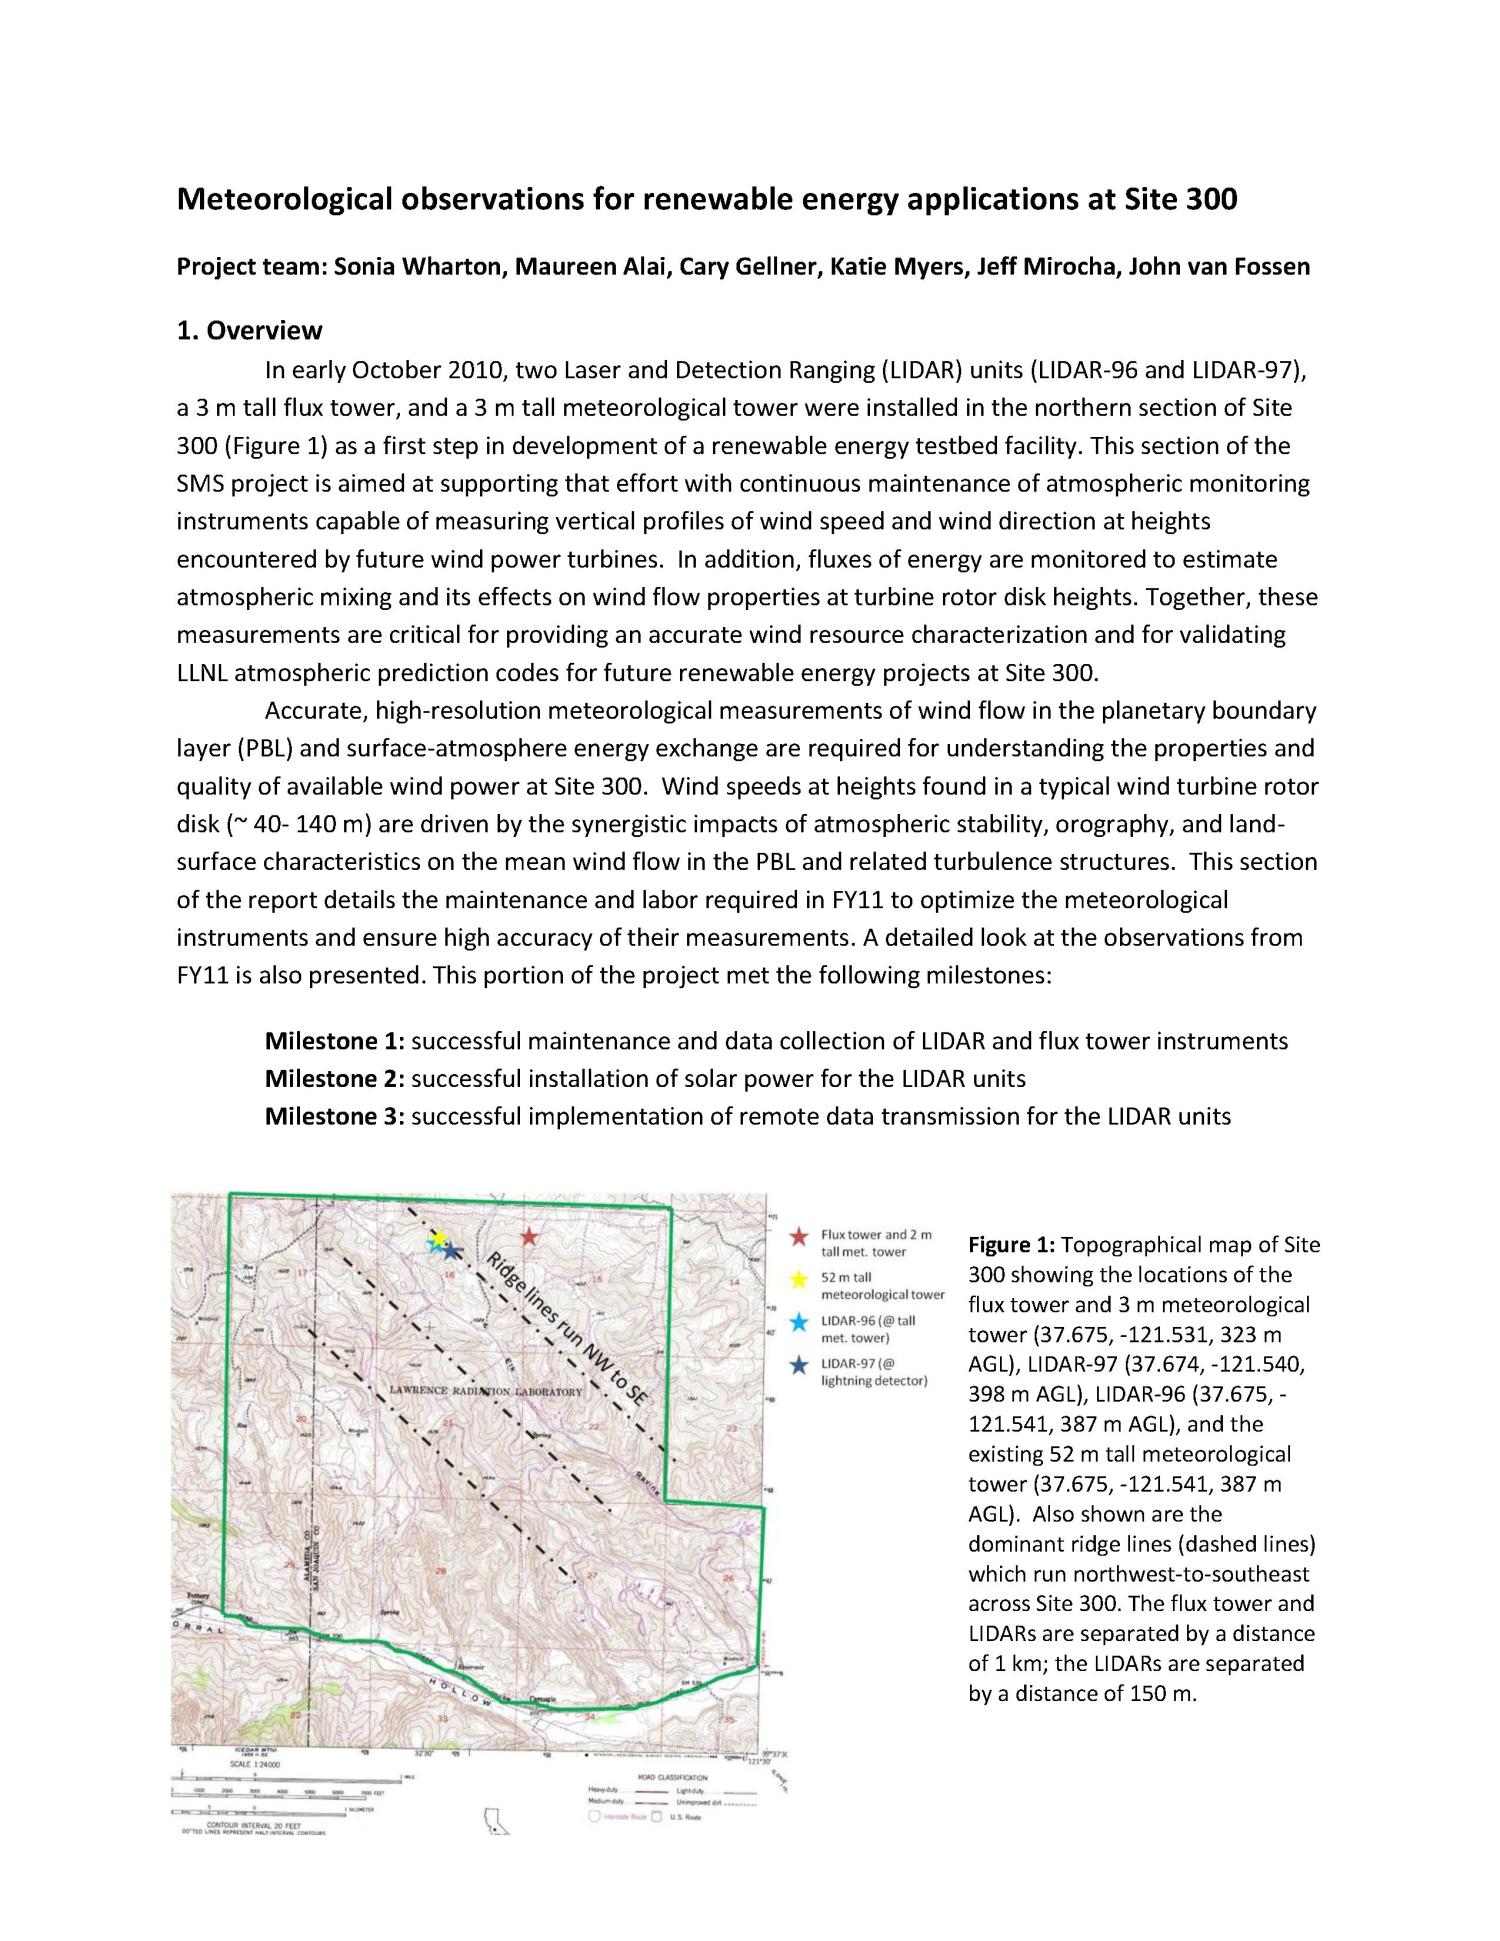 Meteorological Observations for Renewable Energy Applications at Site 300
                                                
                                                    [Sequence #]: 3 of 21
                                                